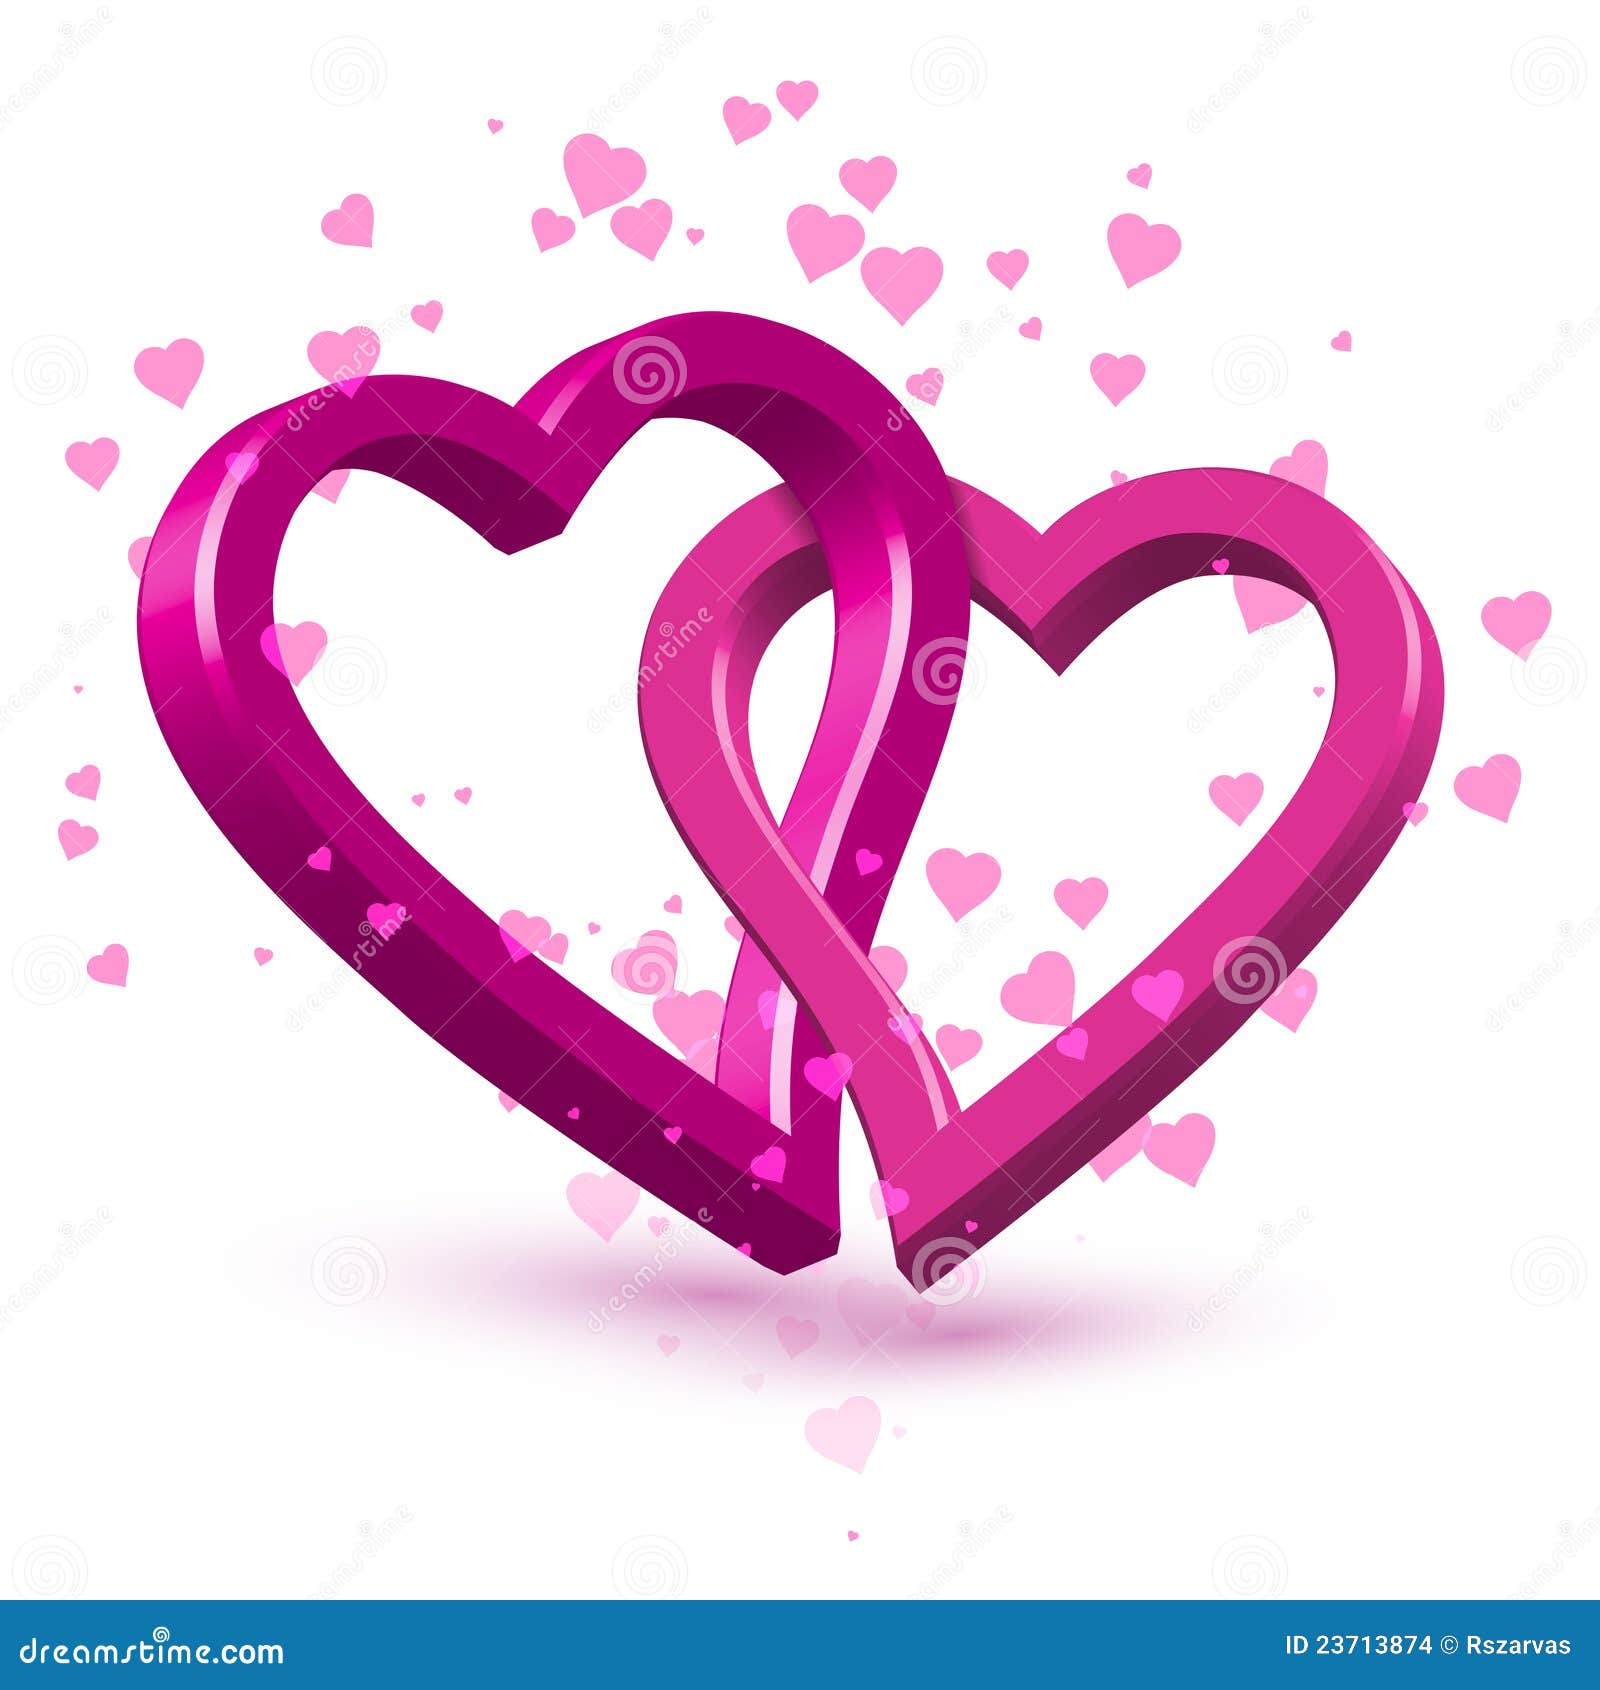 993 Connected Hearts Stock Illustrations, Vectors & Clipart - Dreamstime